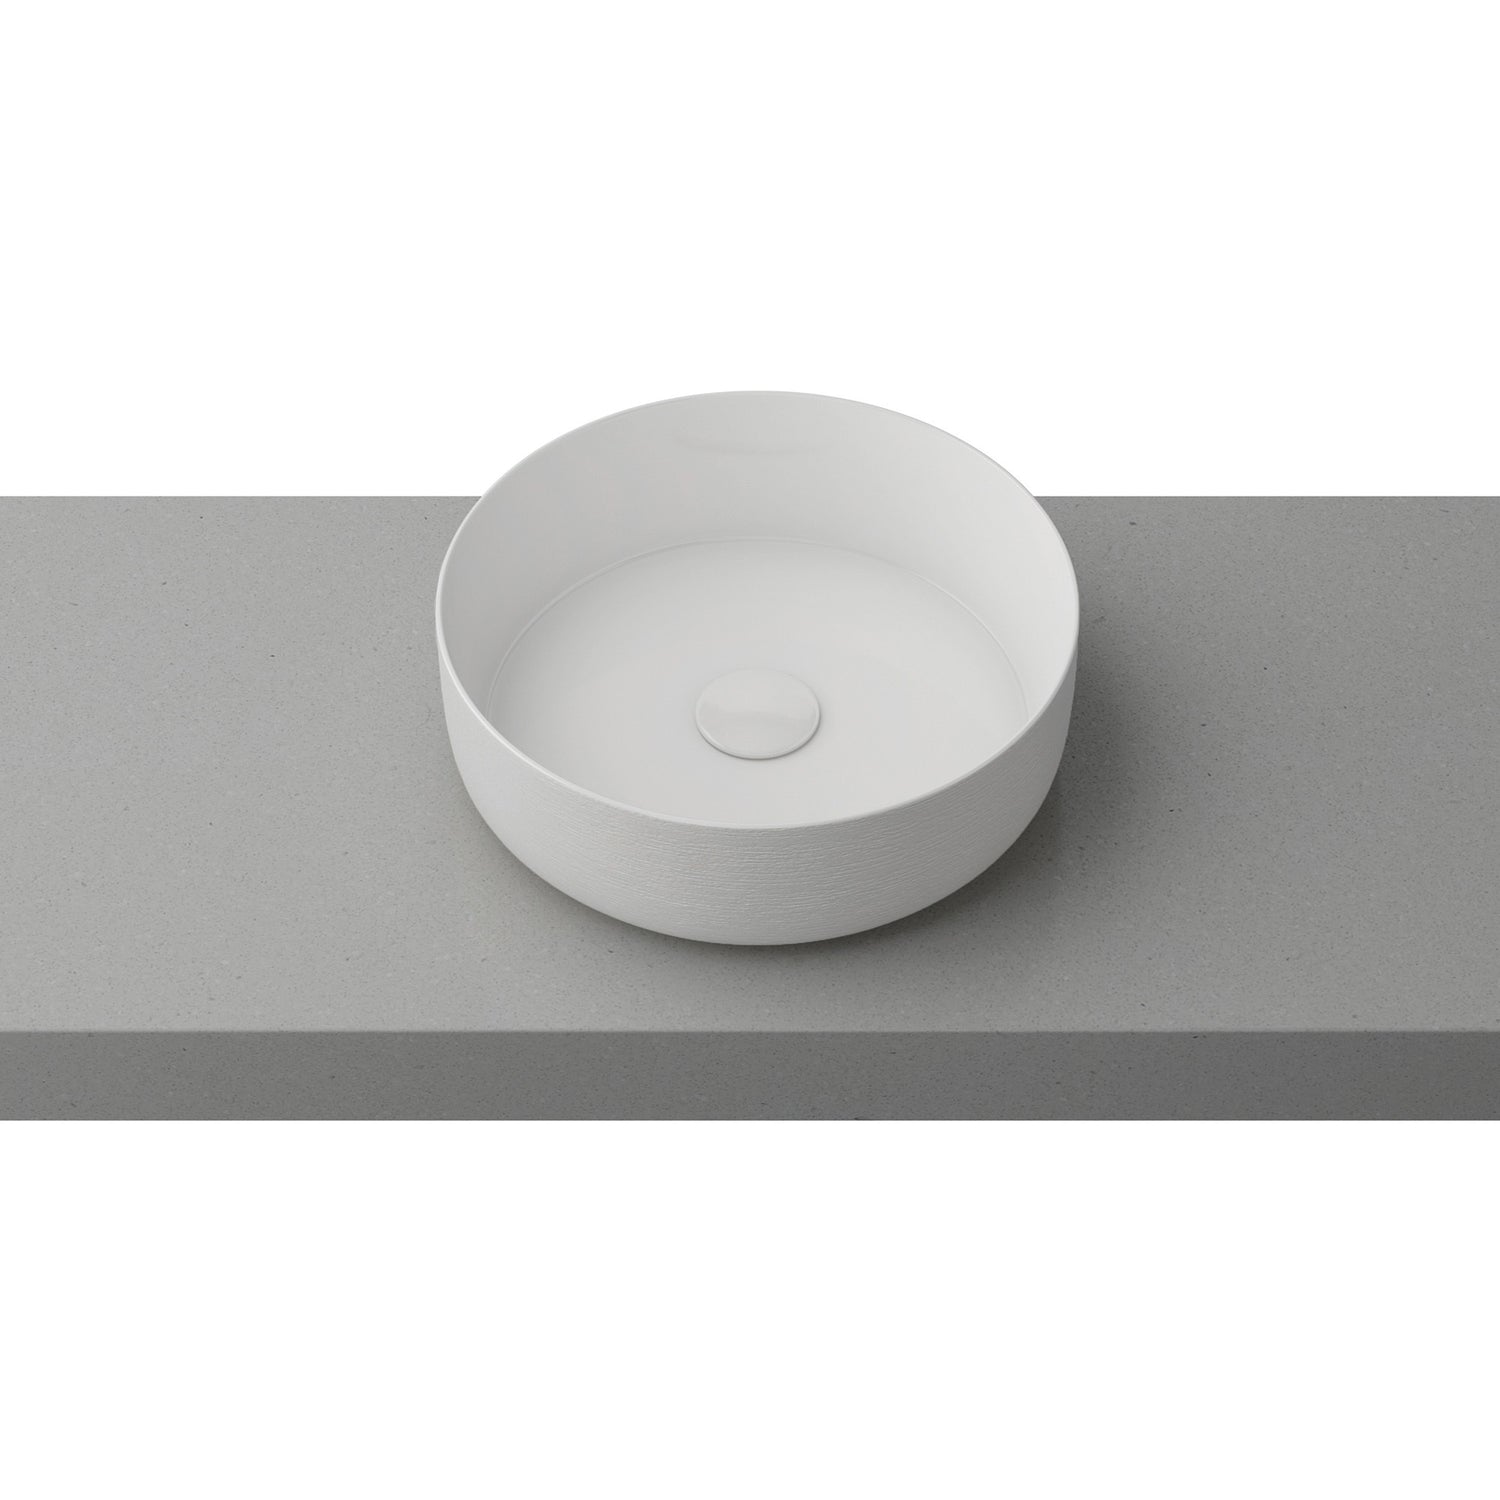 Timberline Allure Raked Above Counter  Basin 360mm, Matte White